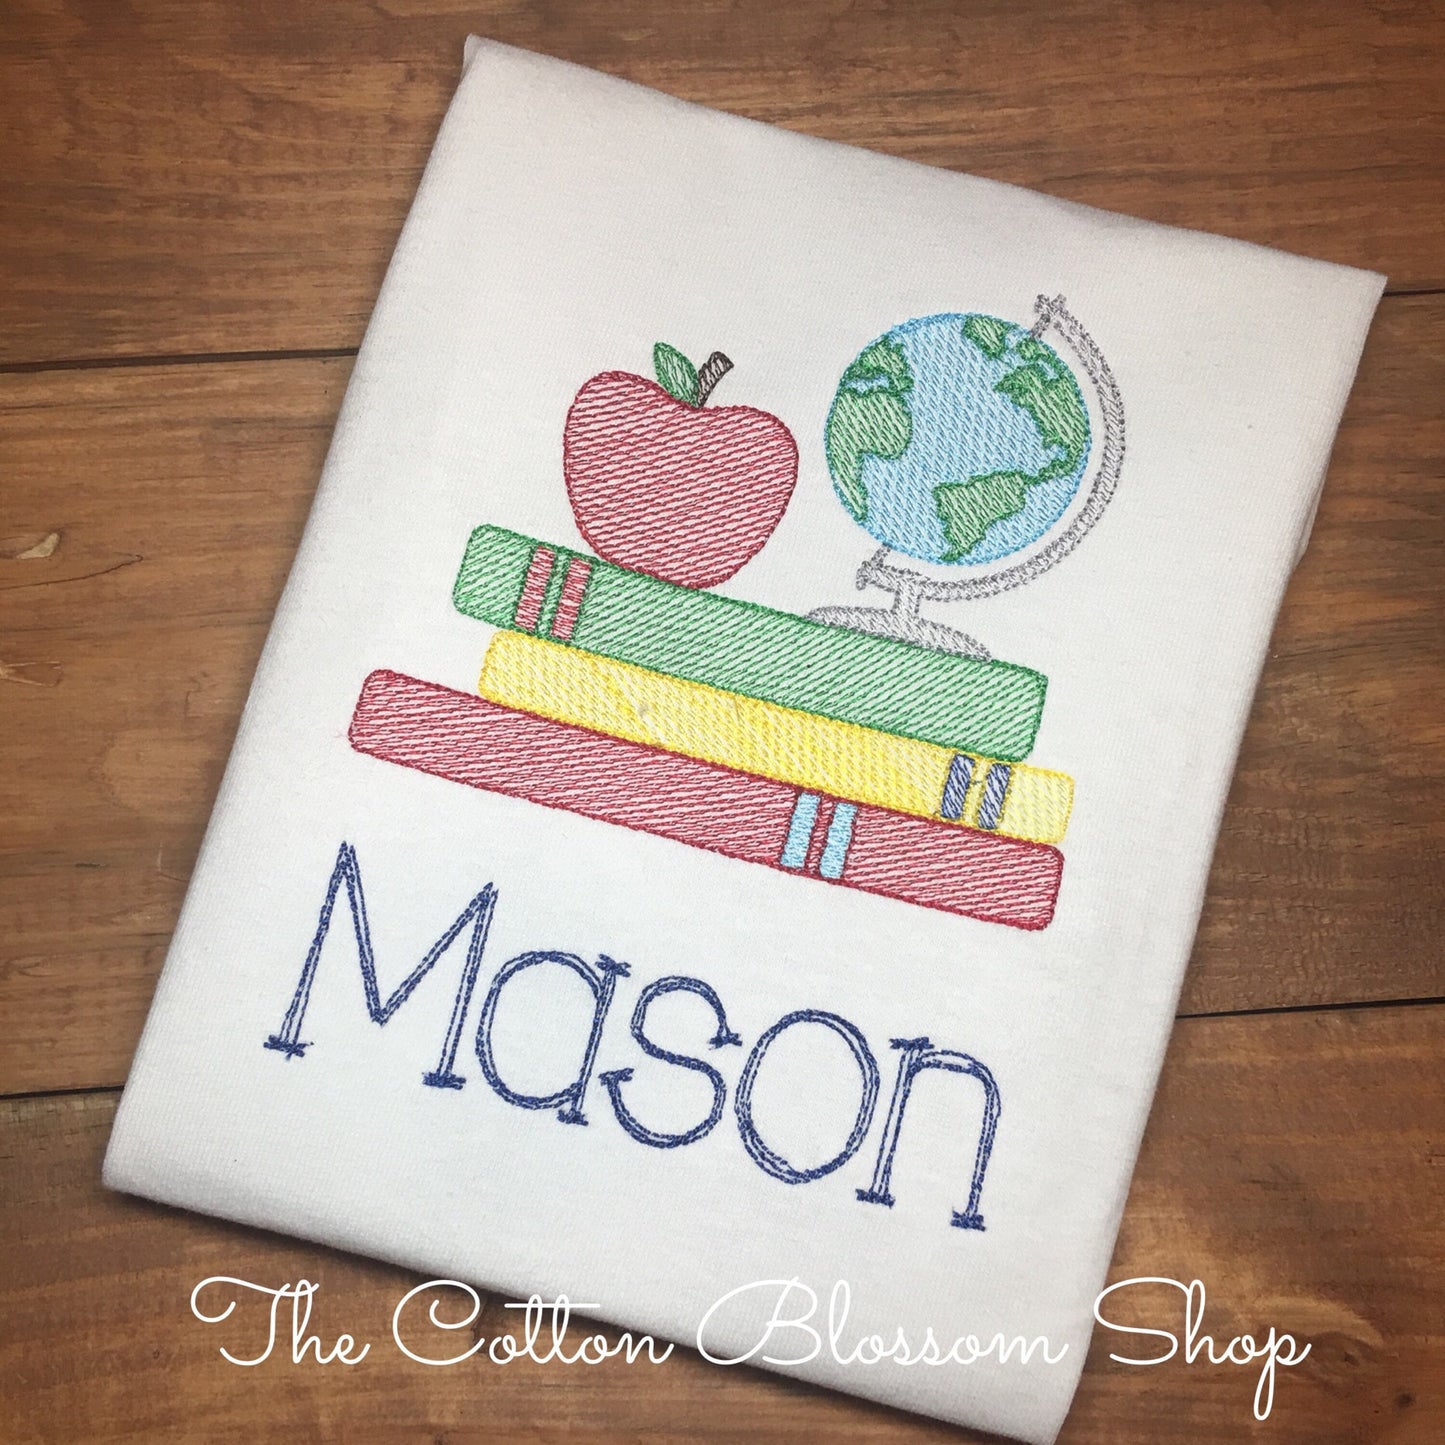 Boys back to school sketch design shirt, first day of school shirt, boys back to school shirt, boys school supplies sketch embroidered